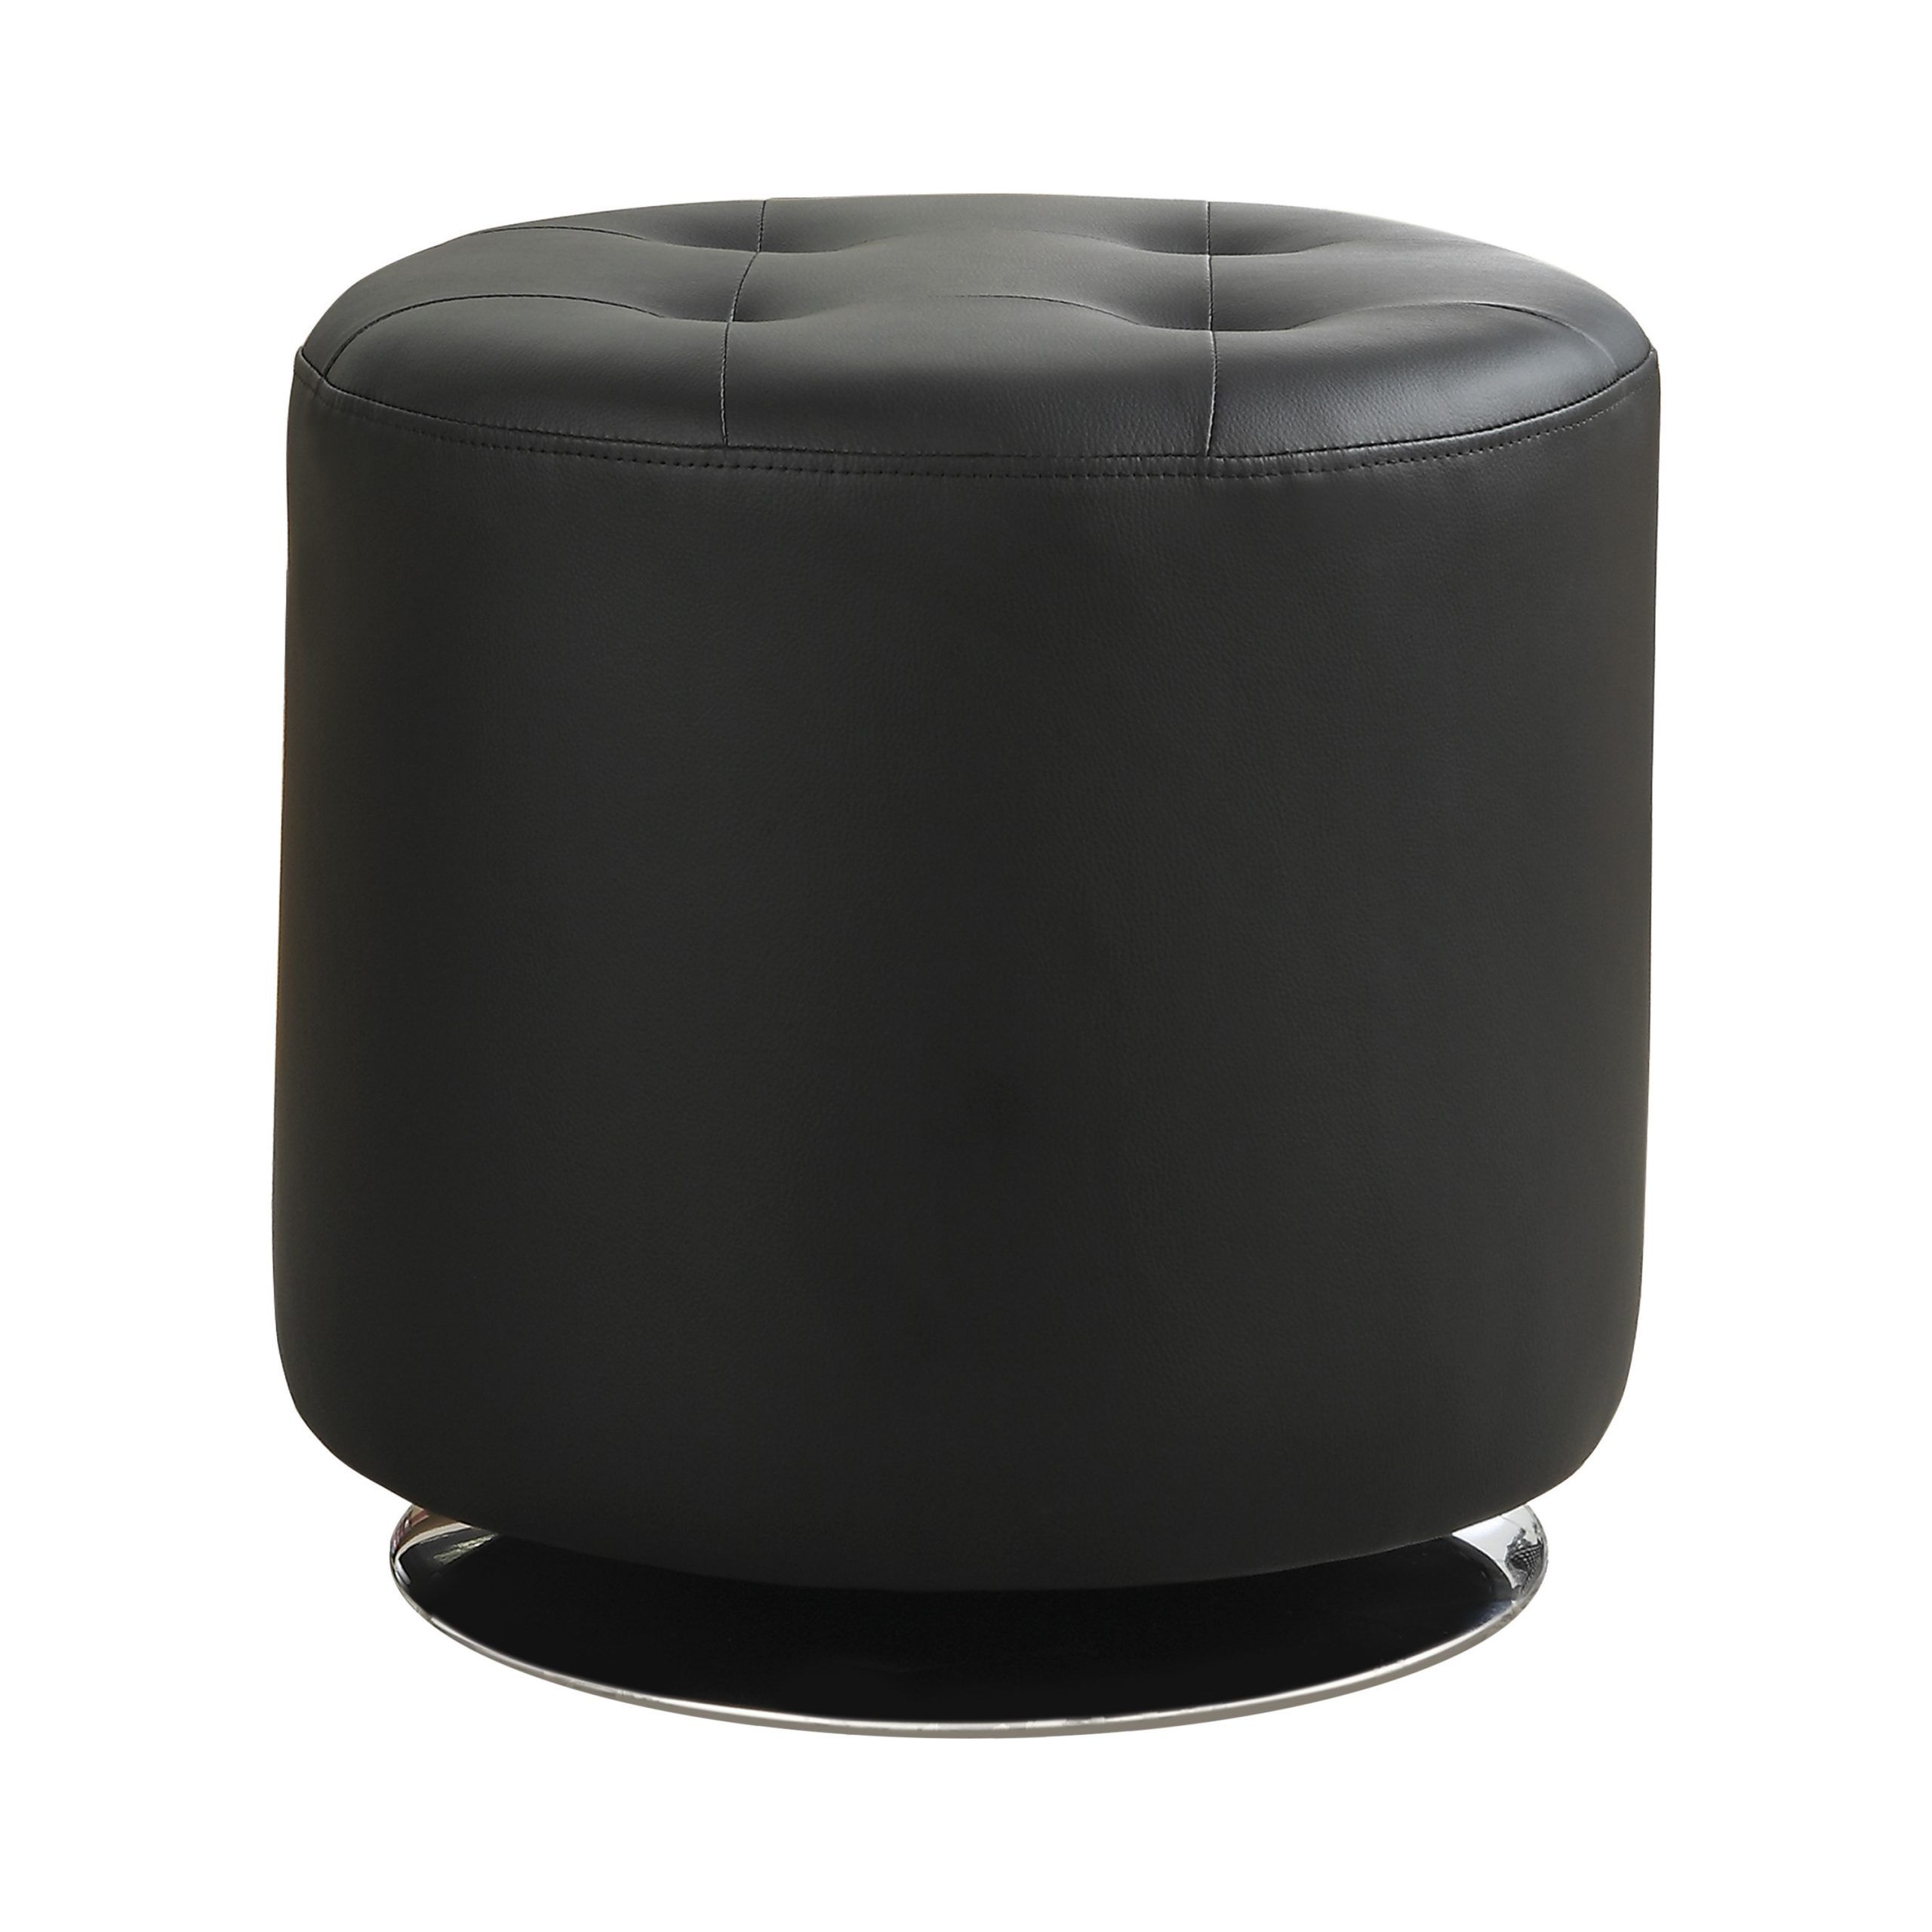 Preferred Round Black Tasseled Ottomans Within Round Upholstered Ottoman Black – Coaster Fine Furniture (View 2 of 10)